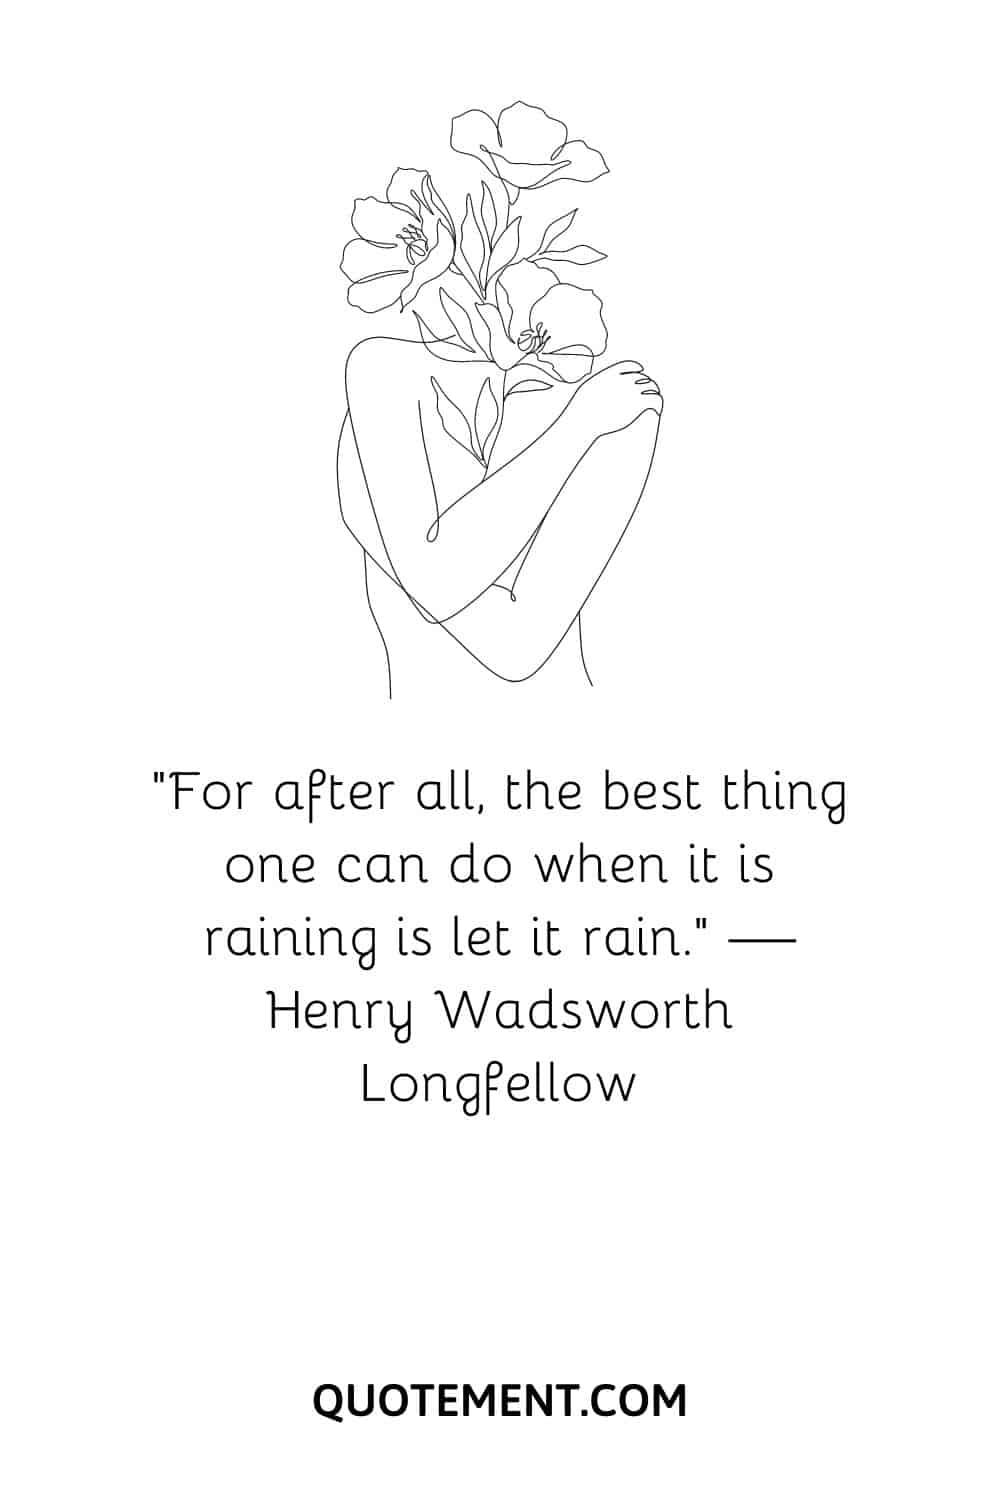 “For after all, the best thing one can do when it is raining is let it rain.” — Henry Wadsworth Longfellow